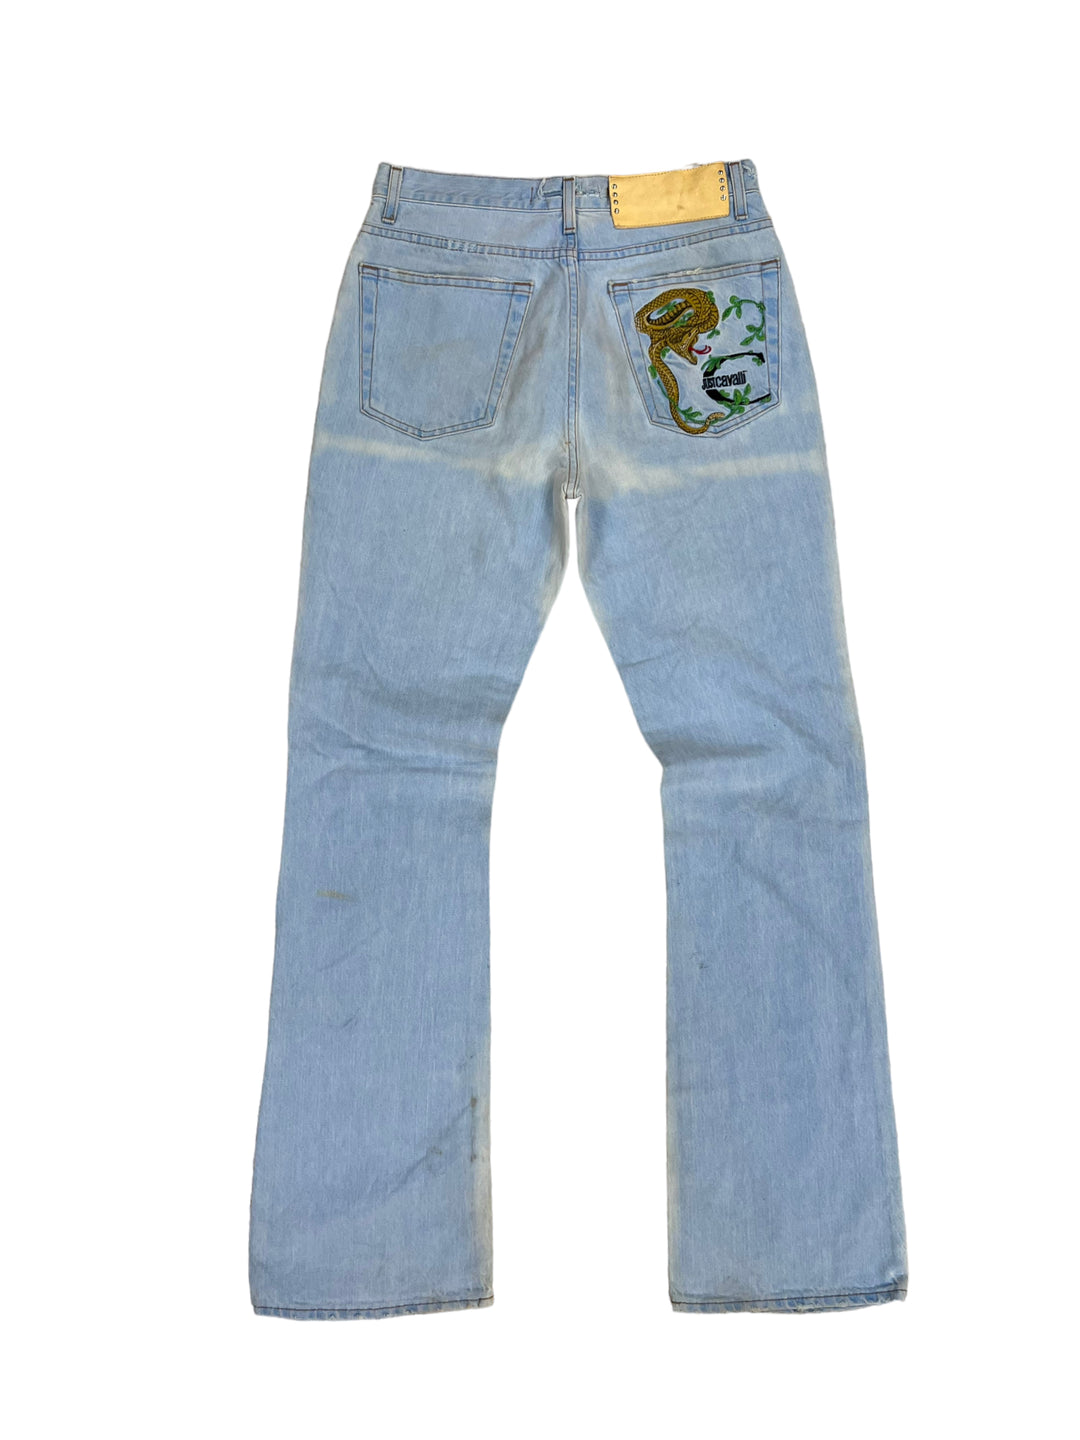 Vintage y2k JUST CAVALLI snake distressed jeans women’s Small(36)